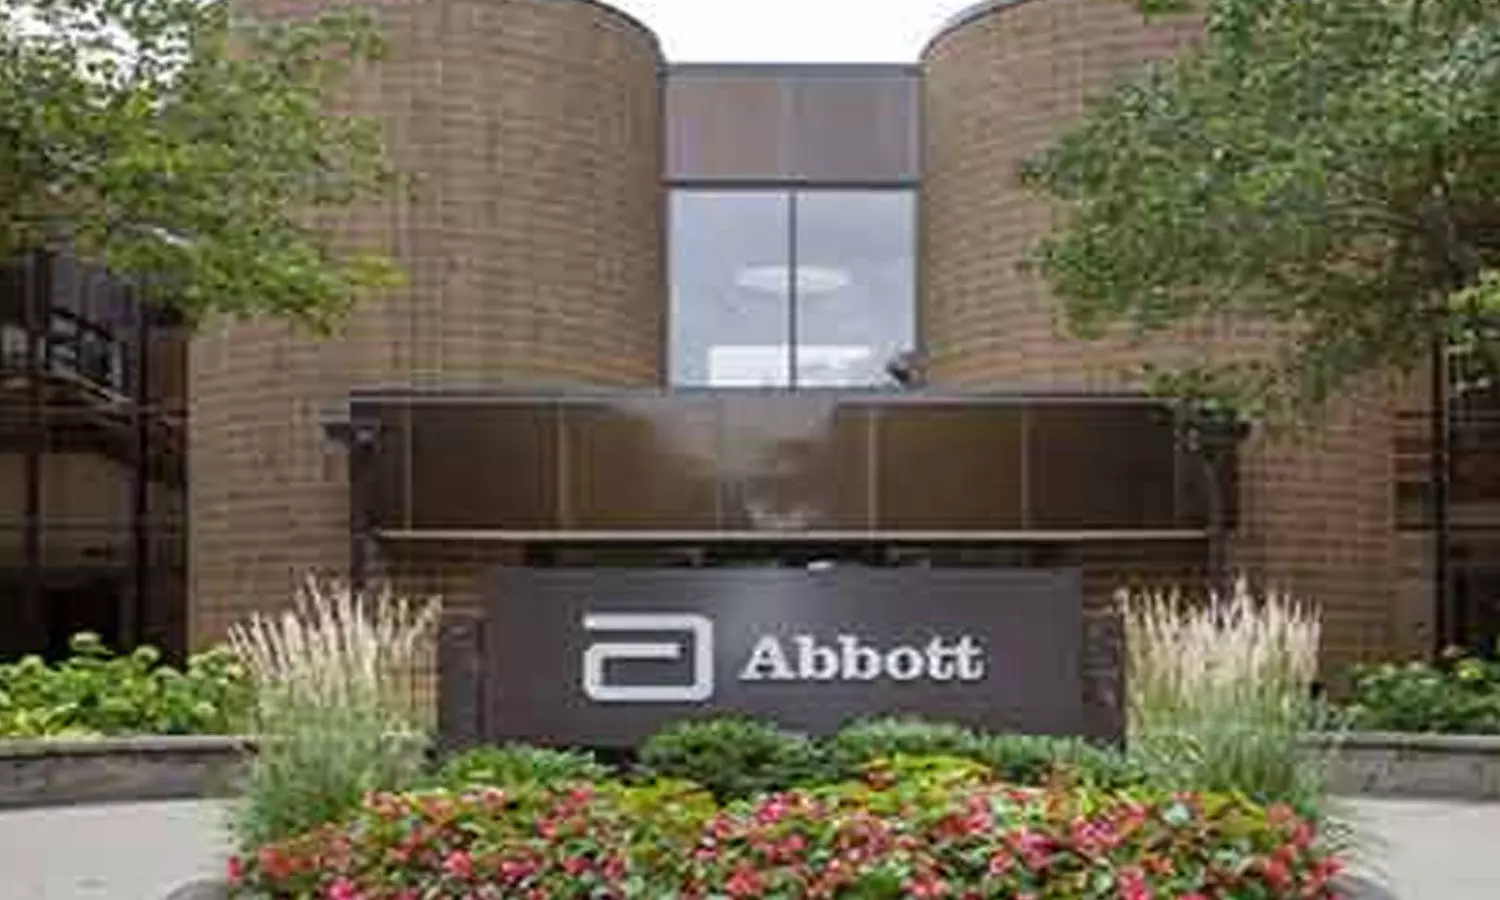 Abbott to release some nutrition products halted after baby formula recall